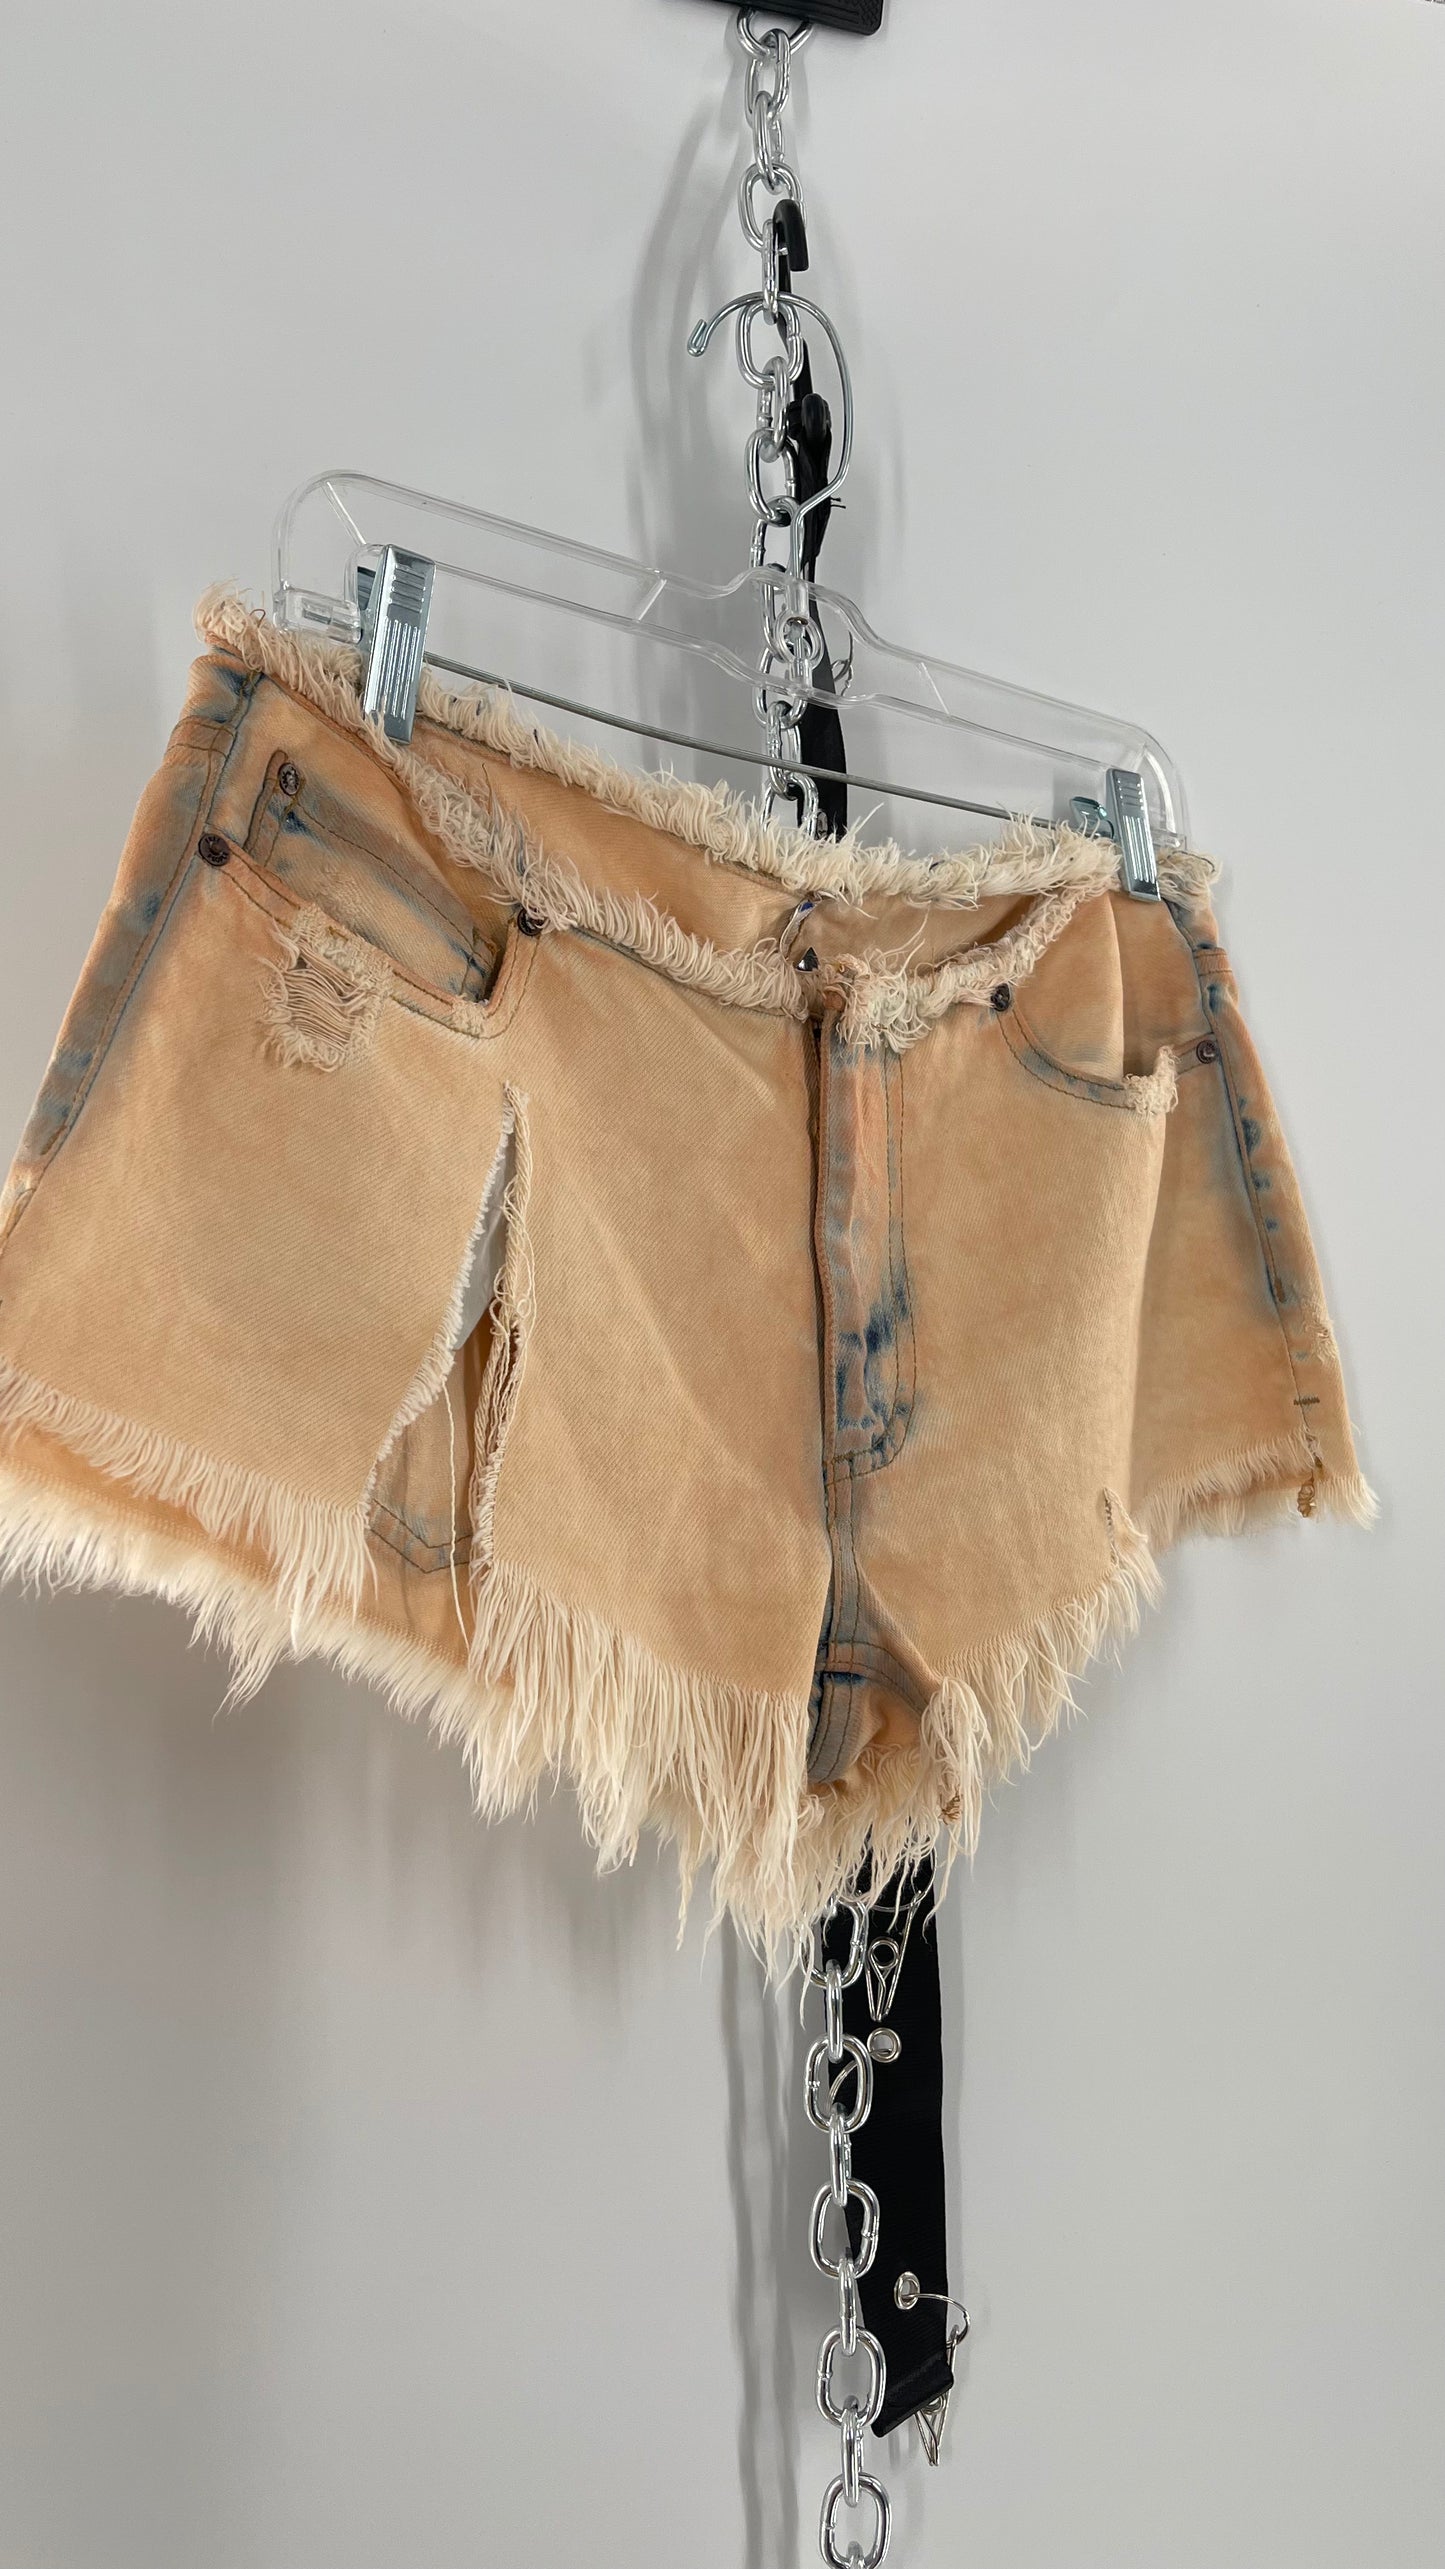 Free People Distressed Booty Shorts with Frayed Hem and Waistline (25)